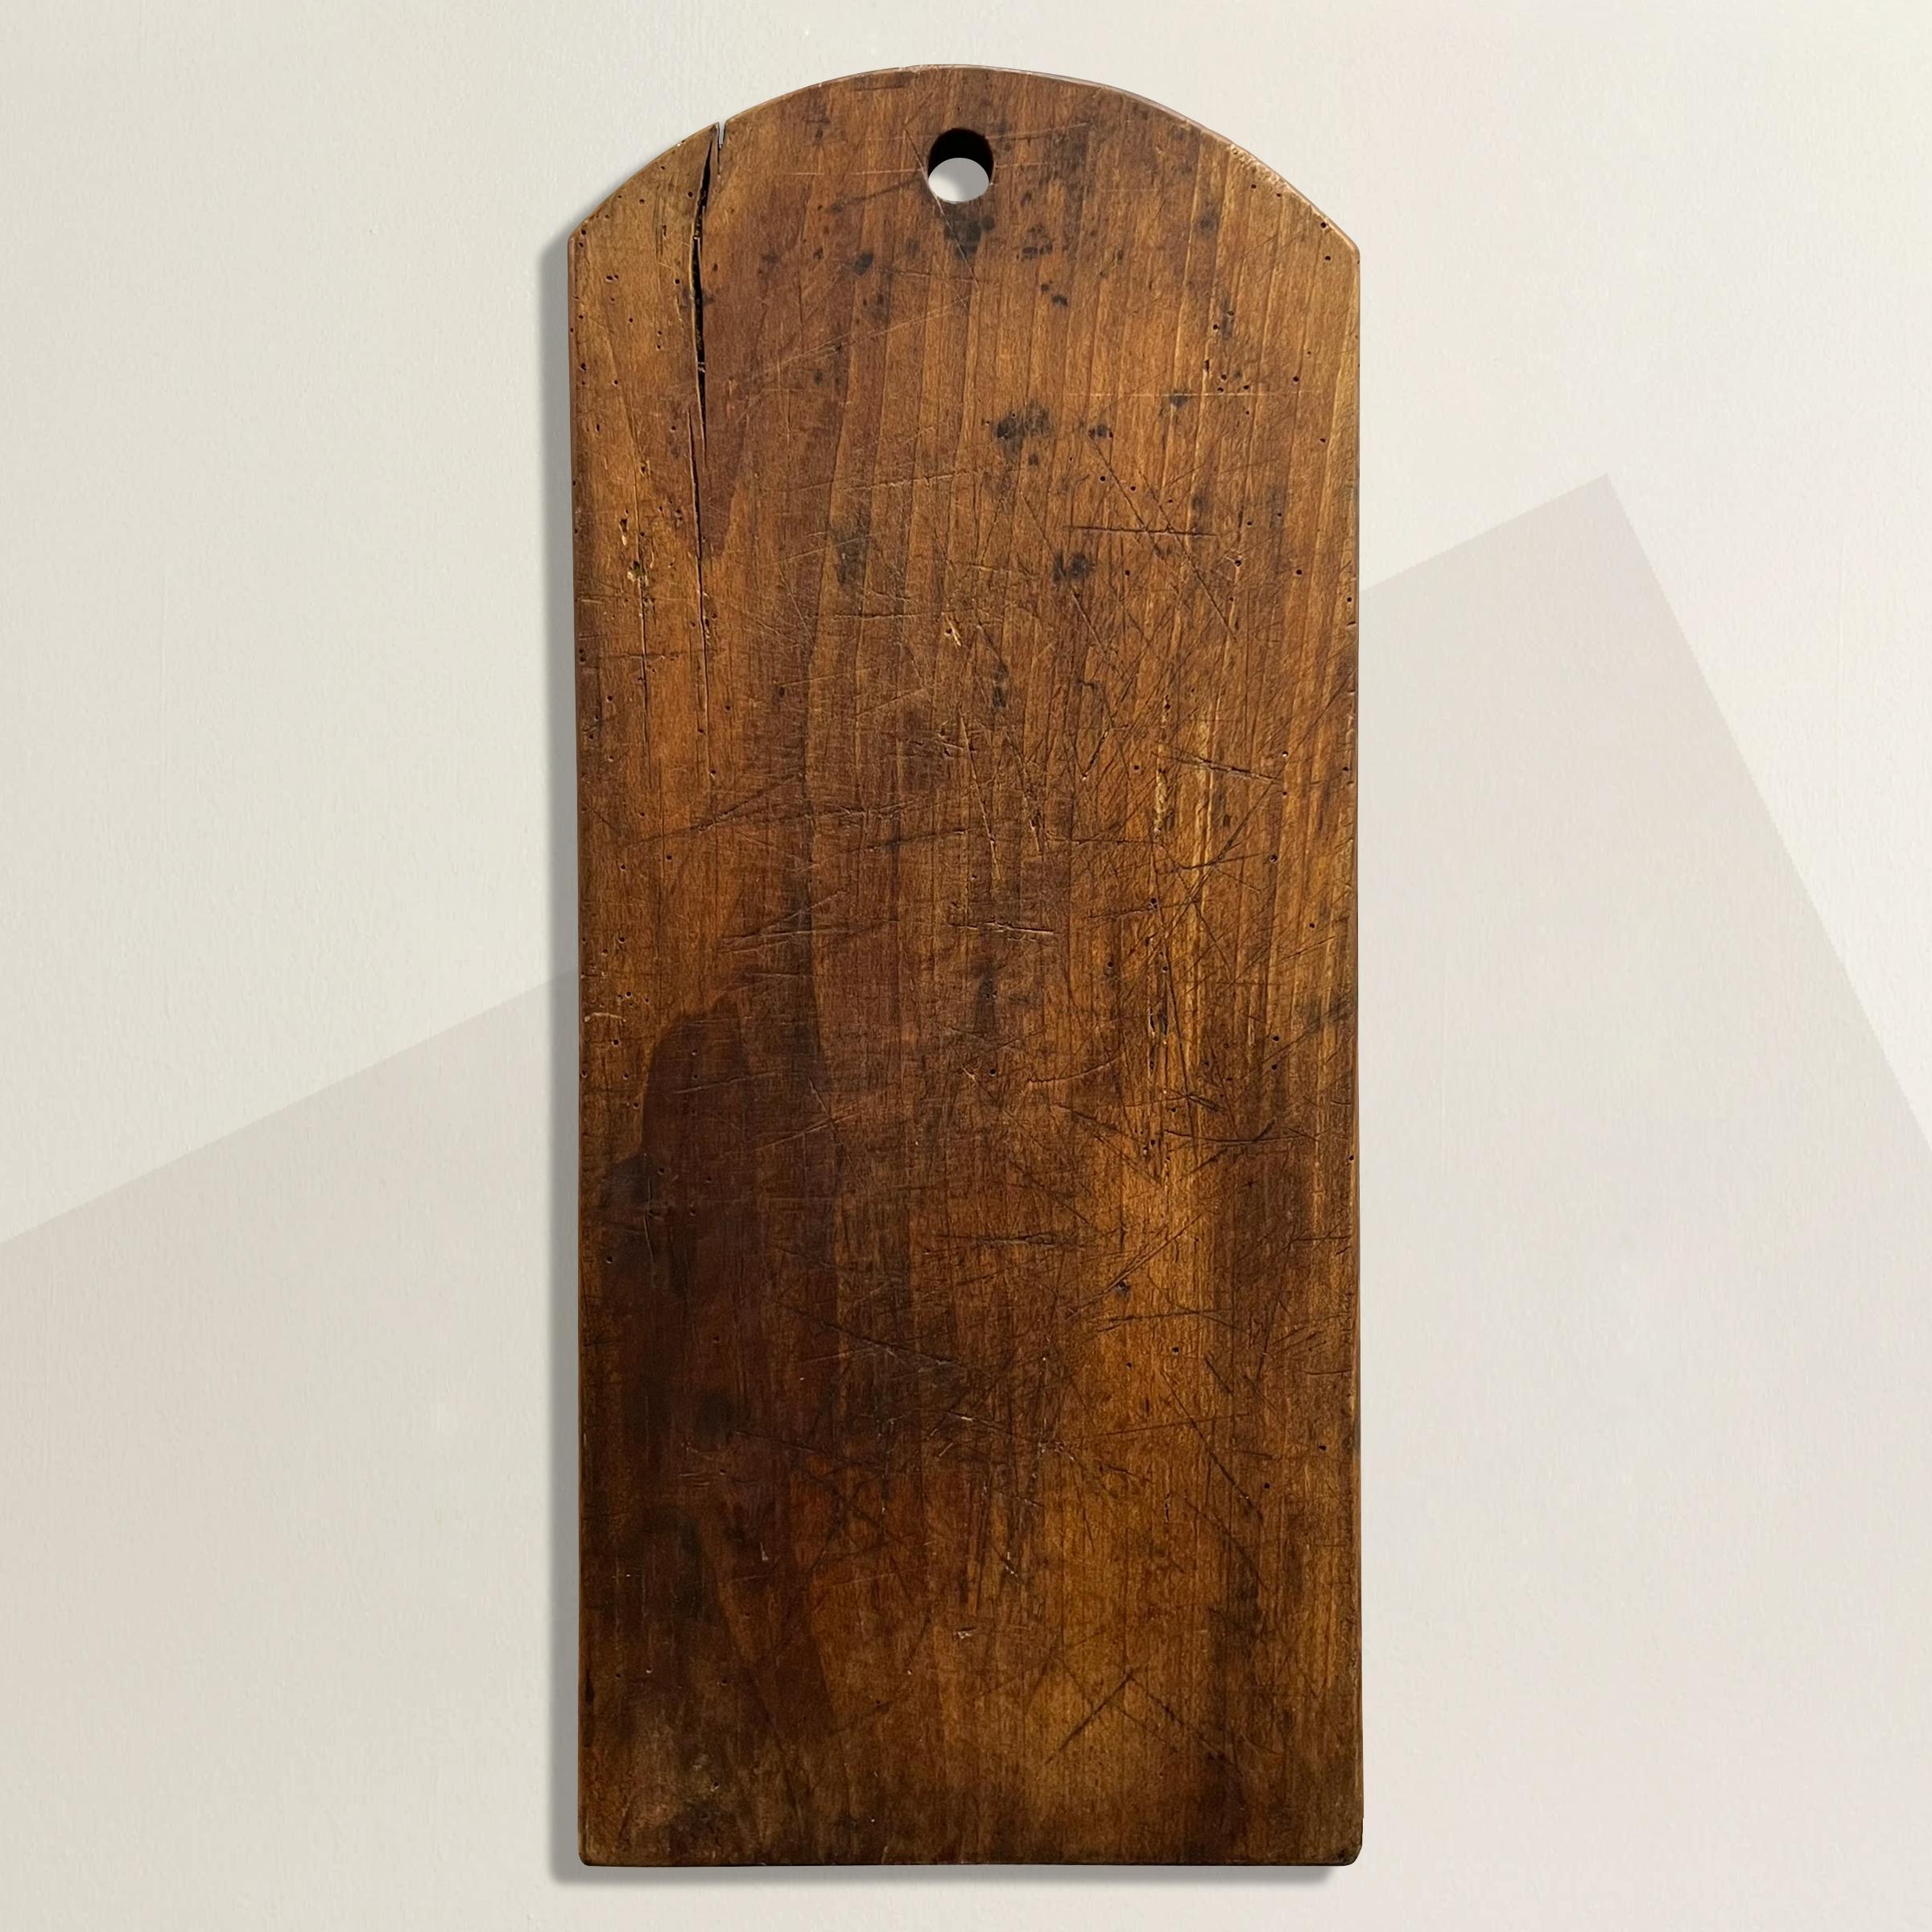 A wonderful early 20th century French cutting board with hundreds of knife marks and a patina that only time can bestow. Perfect for chopping vegetables and bread, or serving cheese and charcuterie at your next fête.